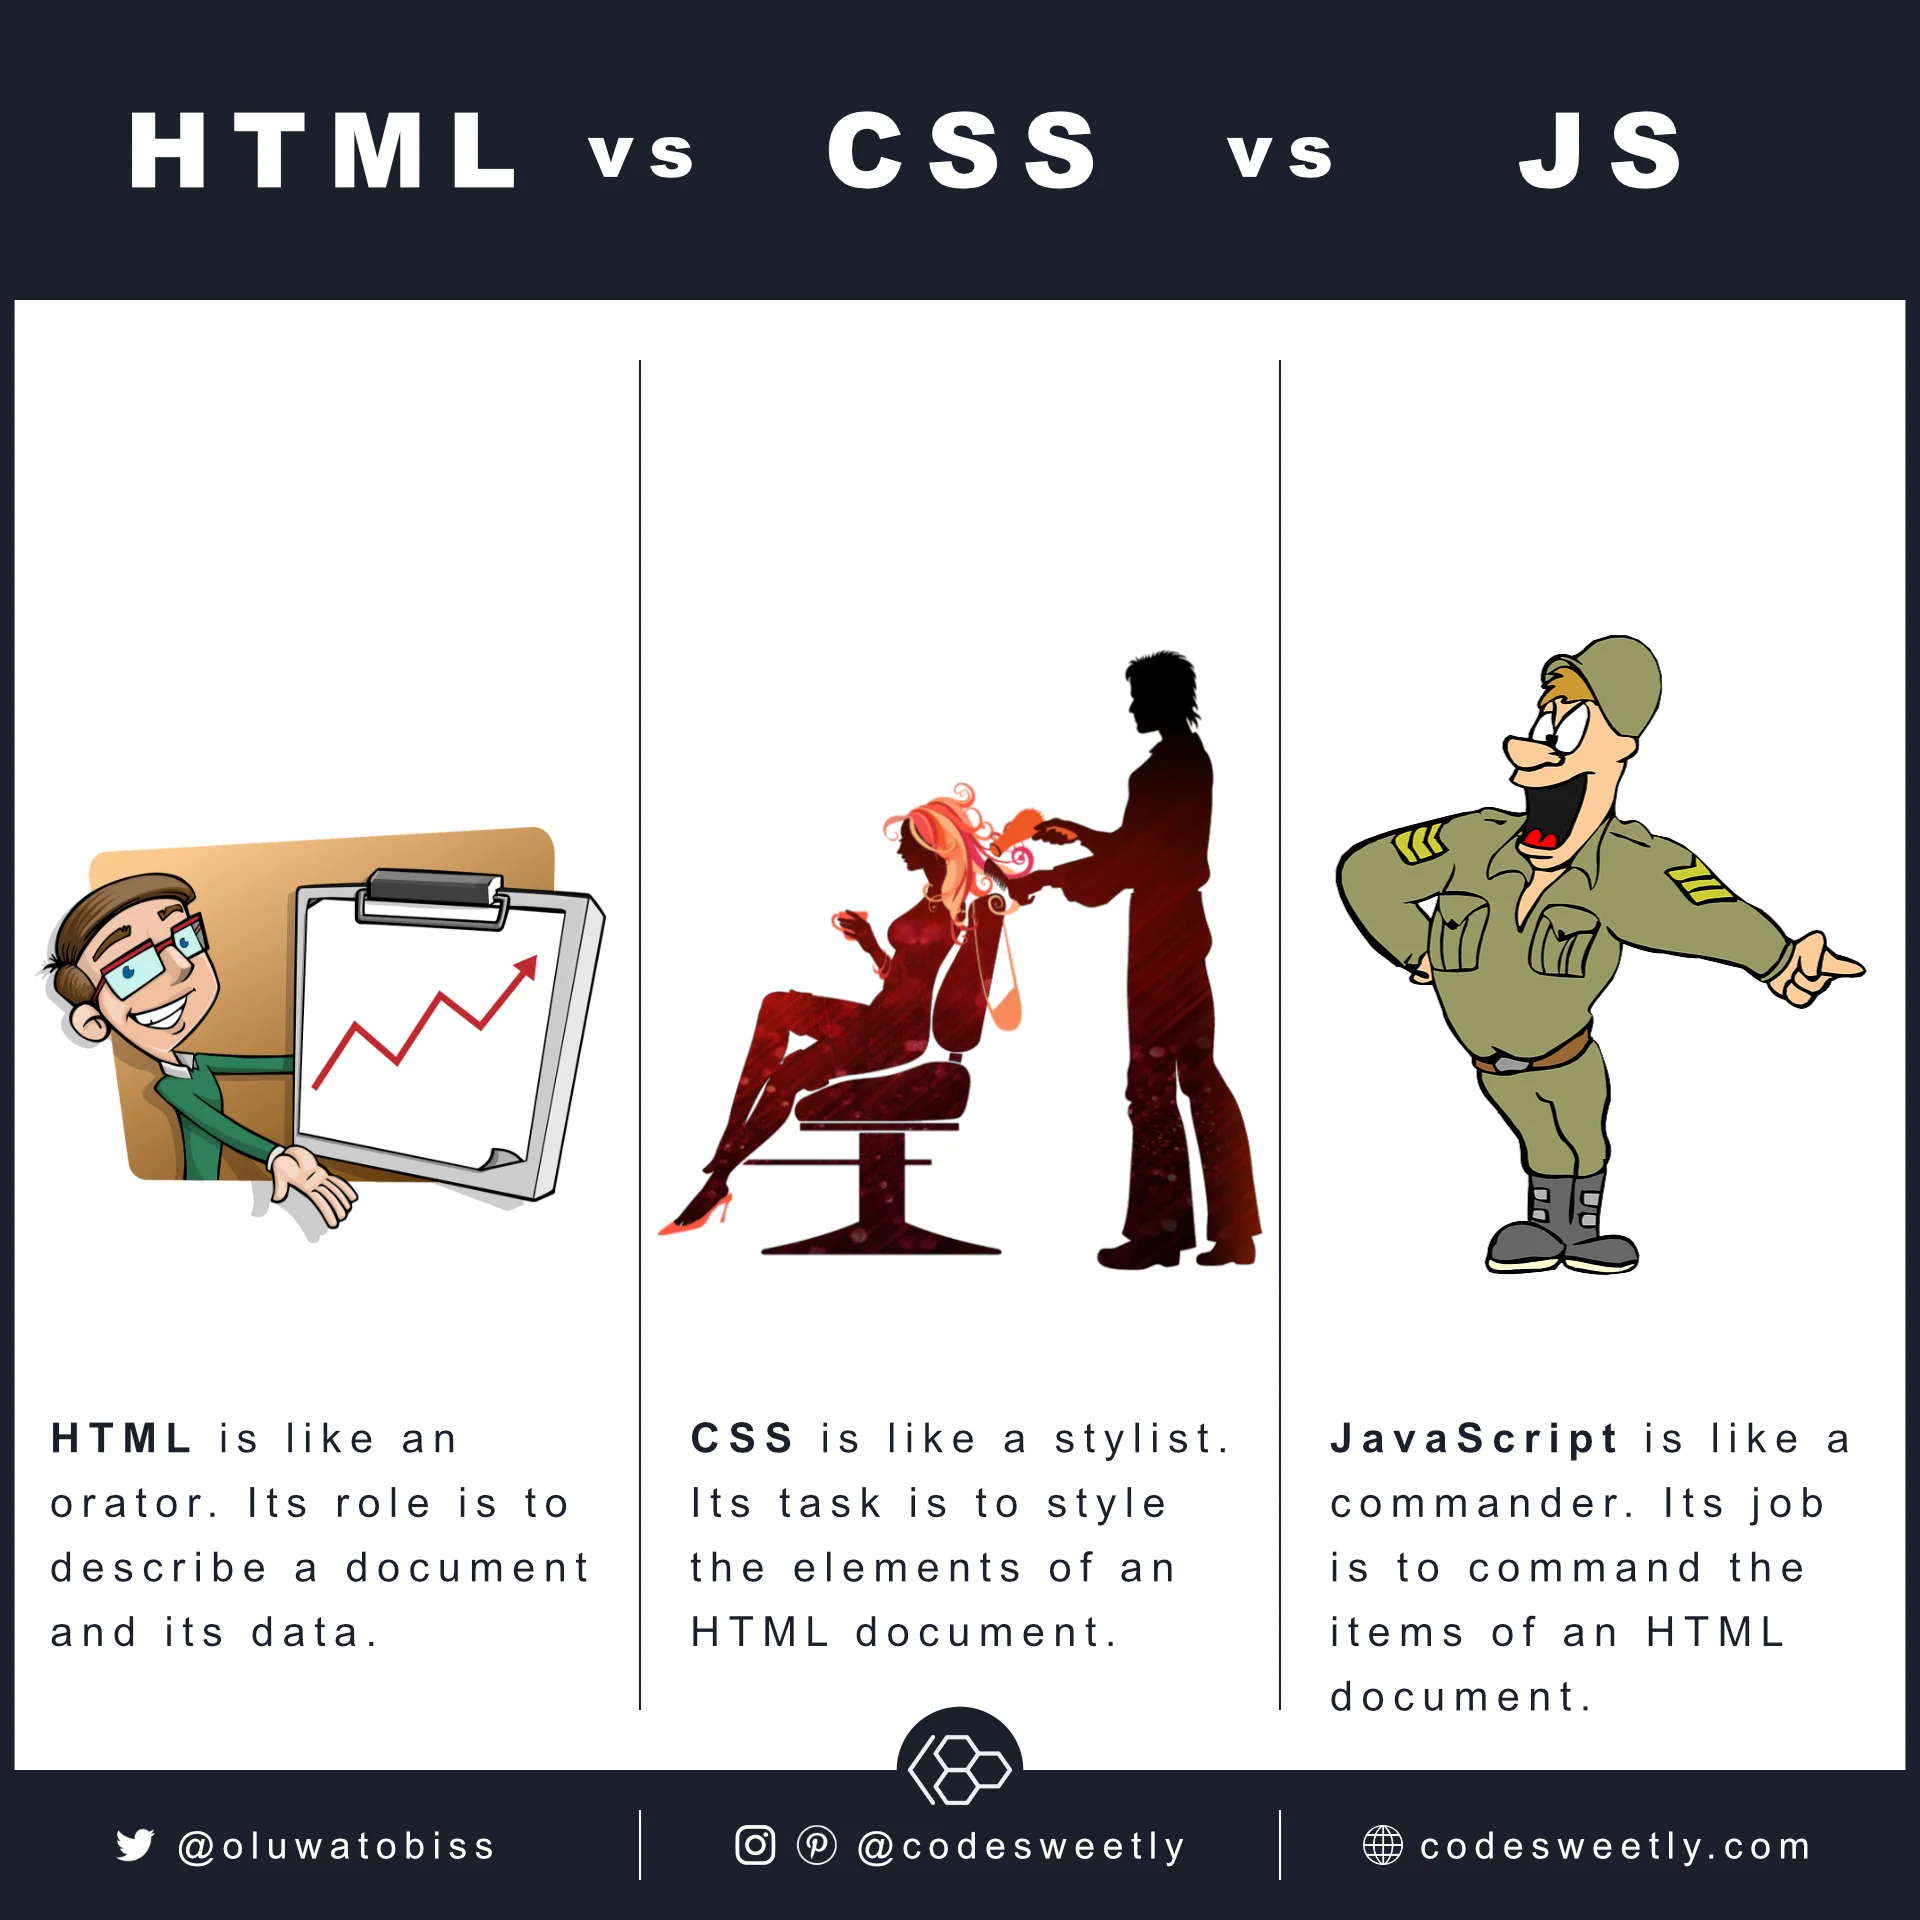 HTML describes data. CSS styles elements. JavaScript commands items